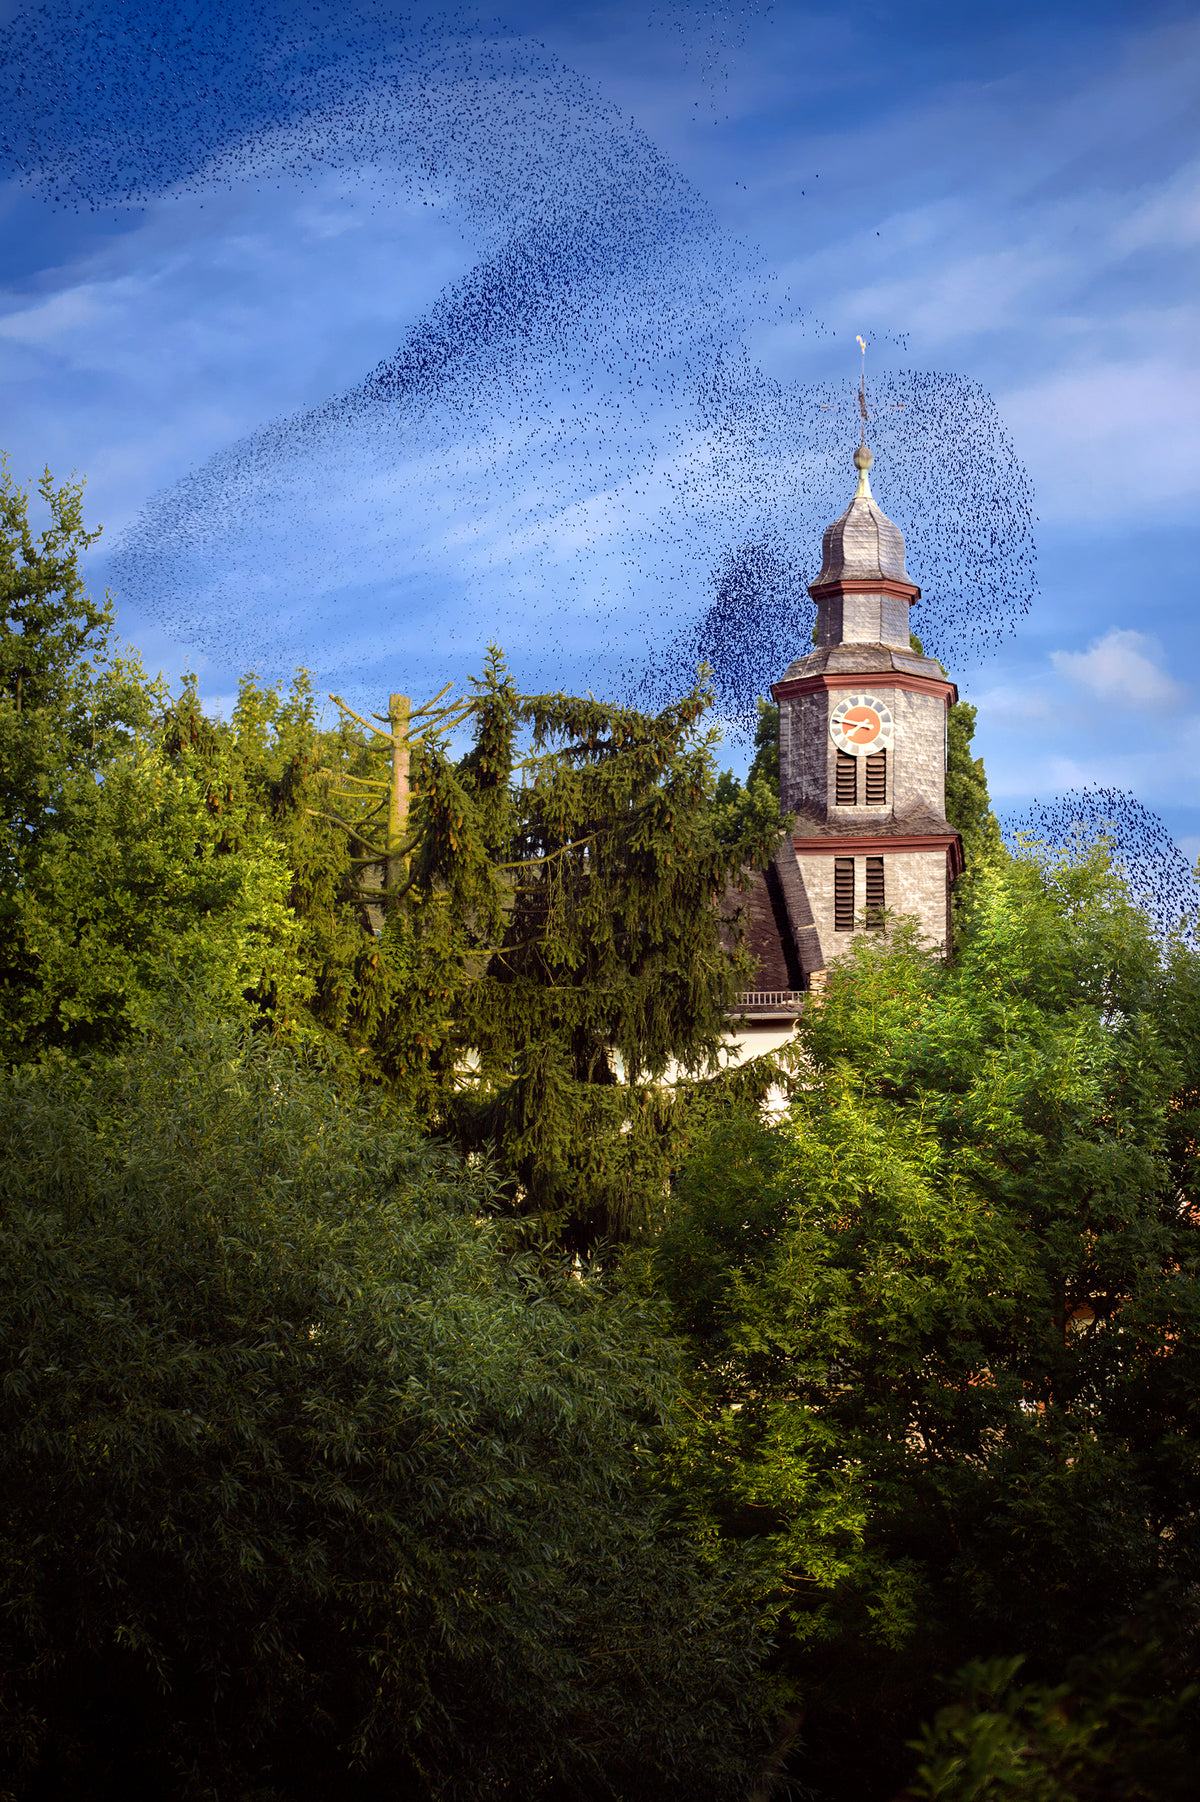 bird swarm above old building in the forest